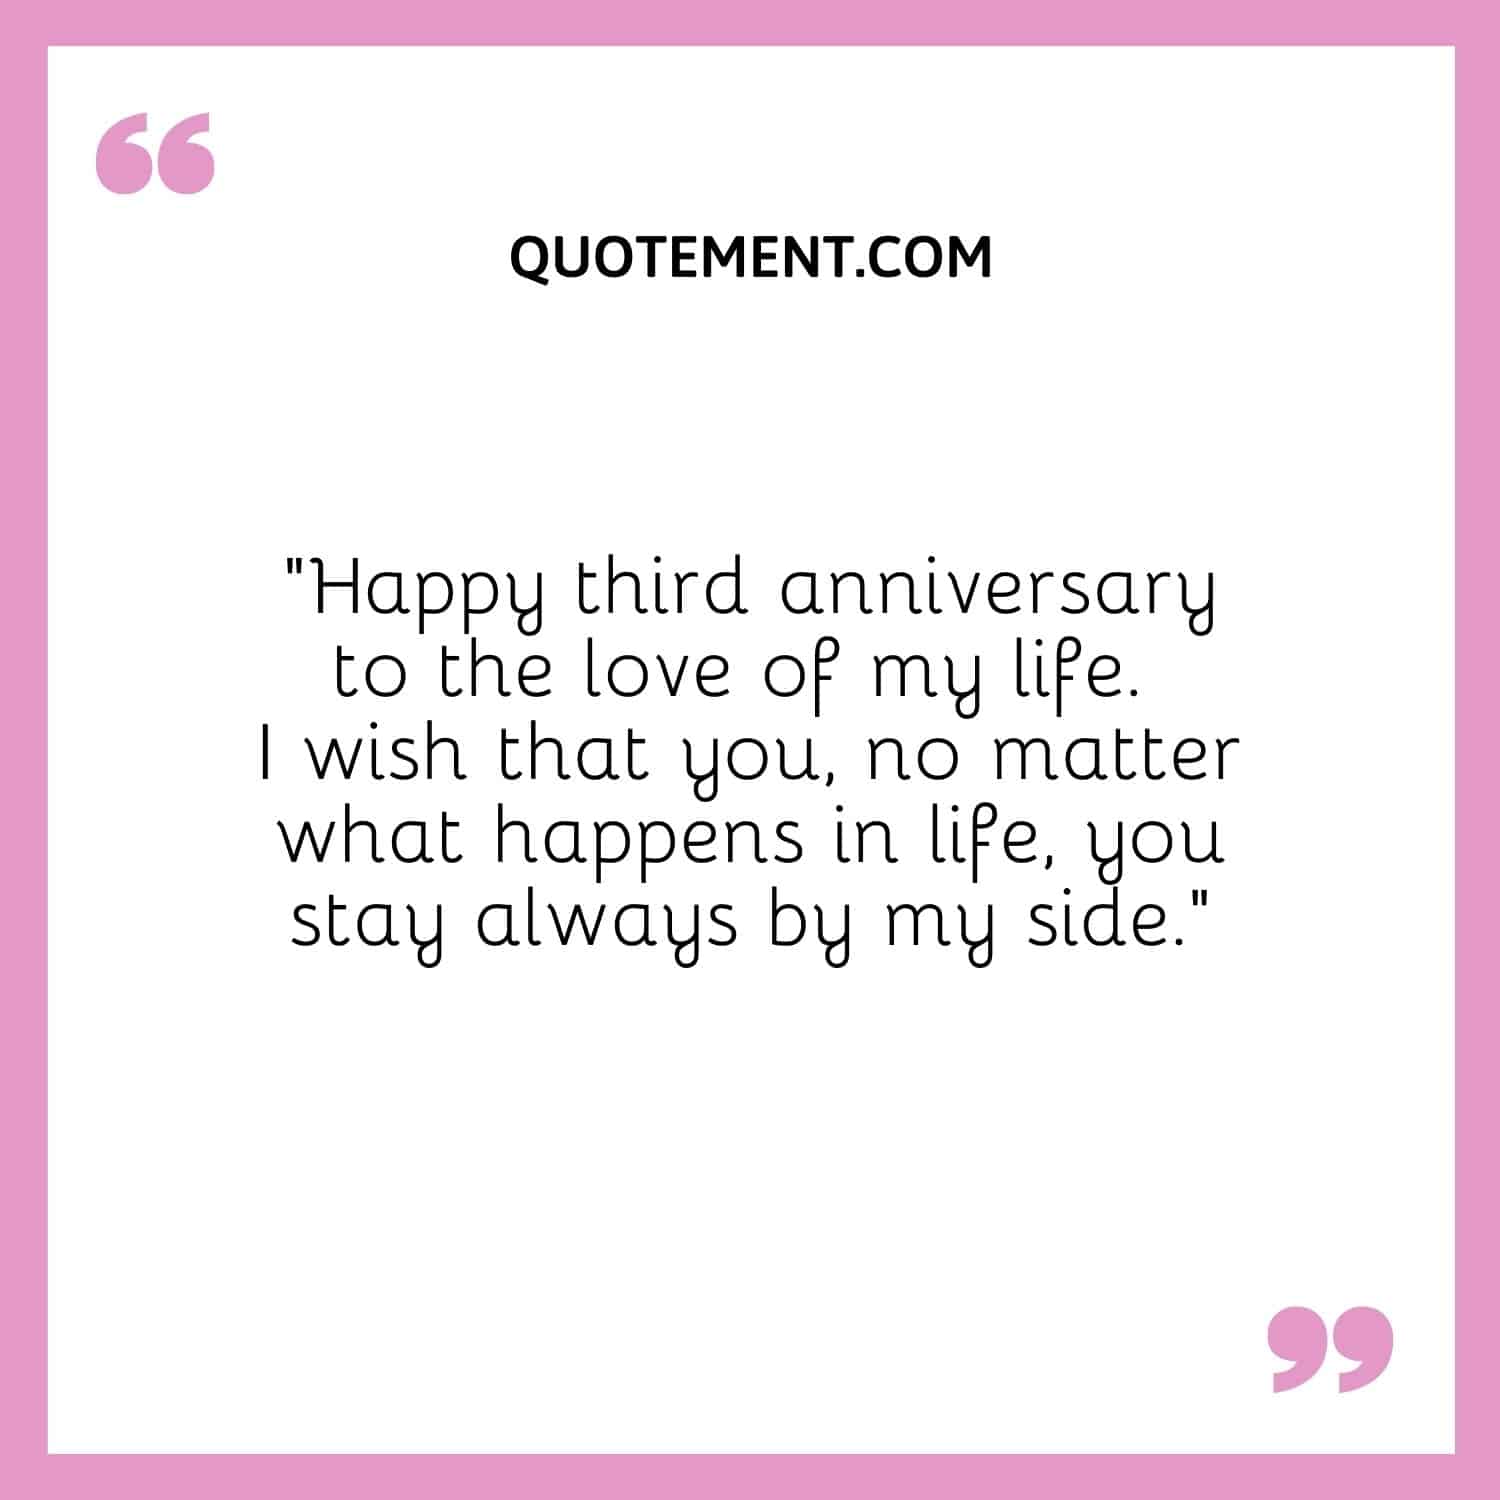 “Happy third anniversary to the love of my life. I wish that you, no matter what happens in life, you stay always by my side.”